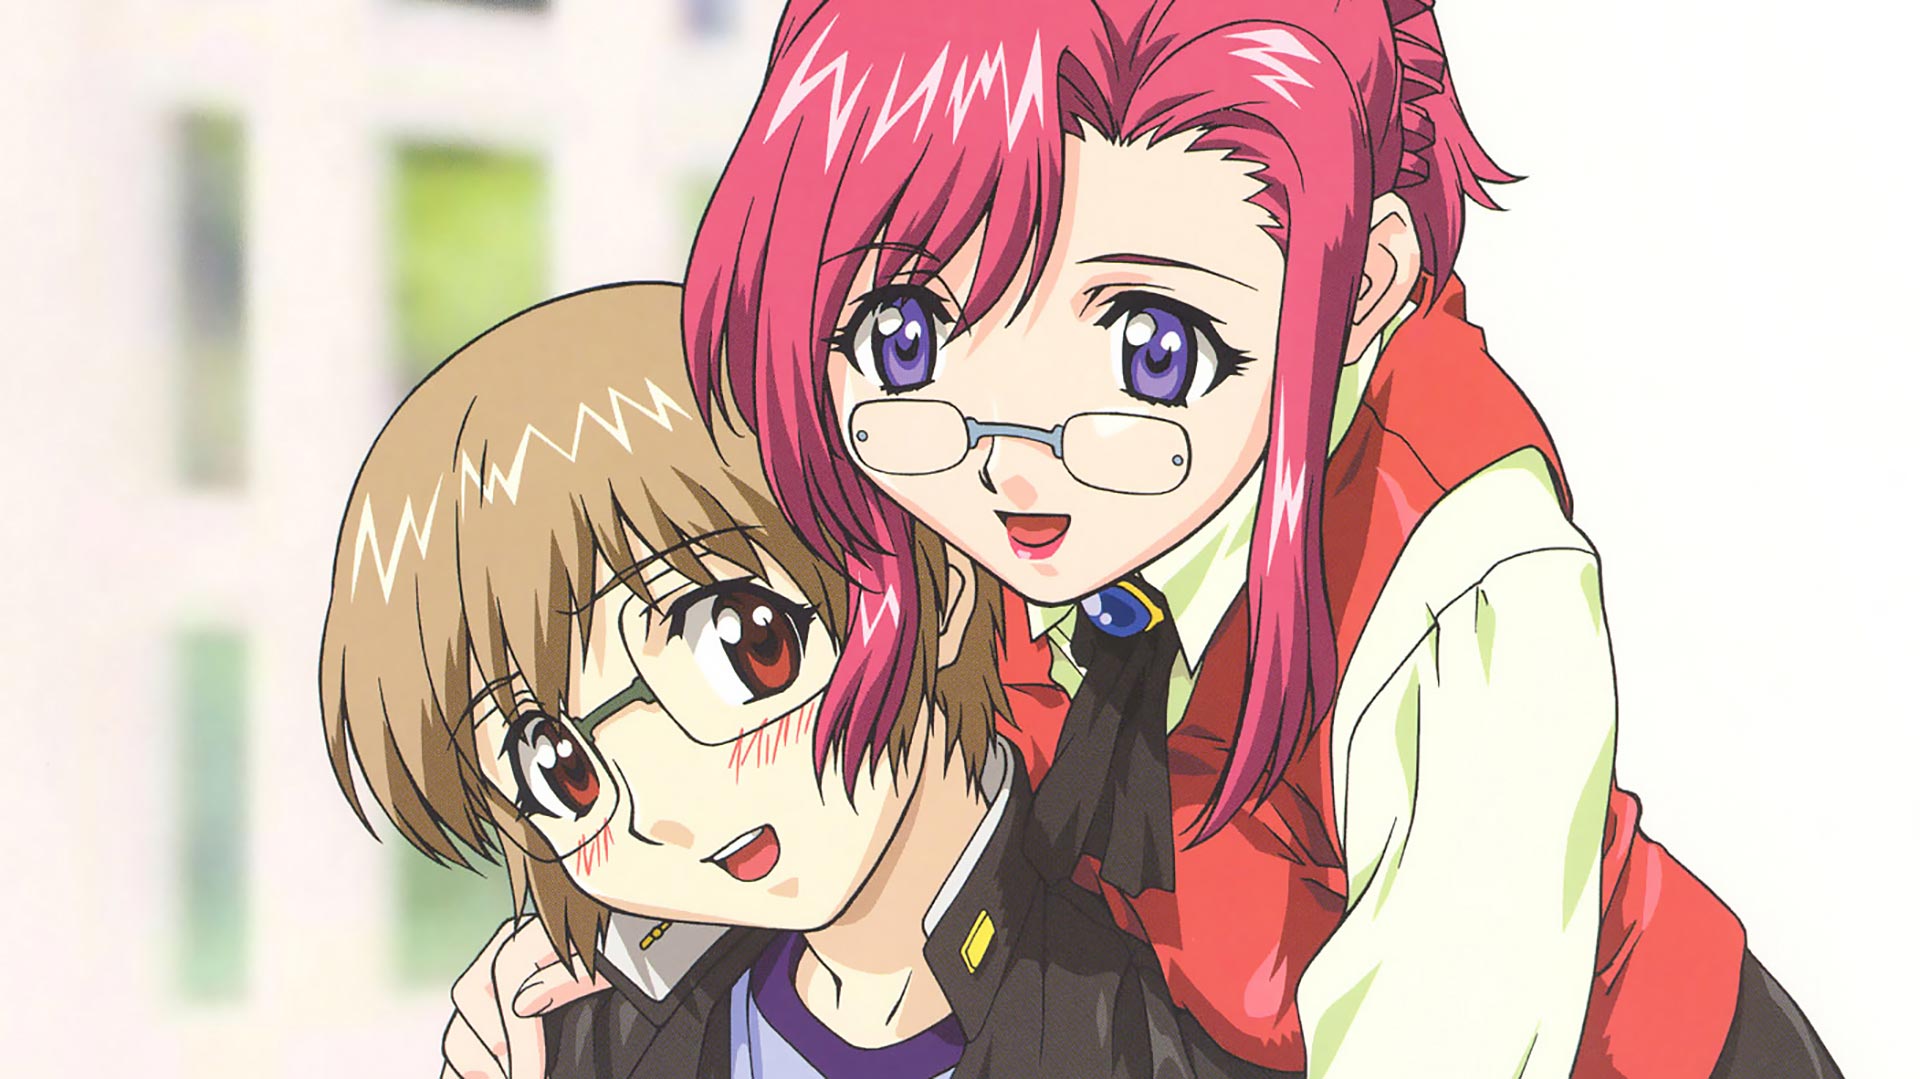 The 30 Best Drama Romance Anime Series - All about Falling in Love